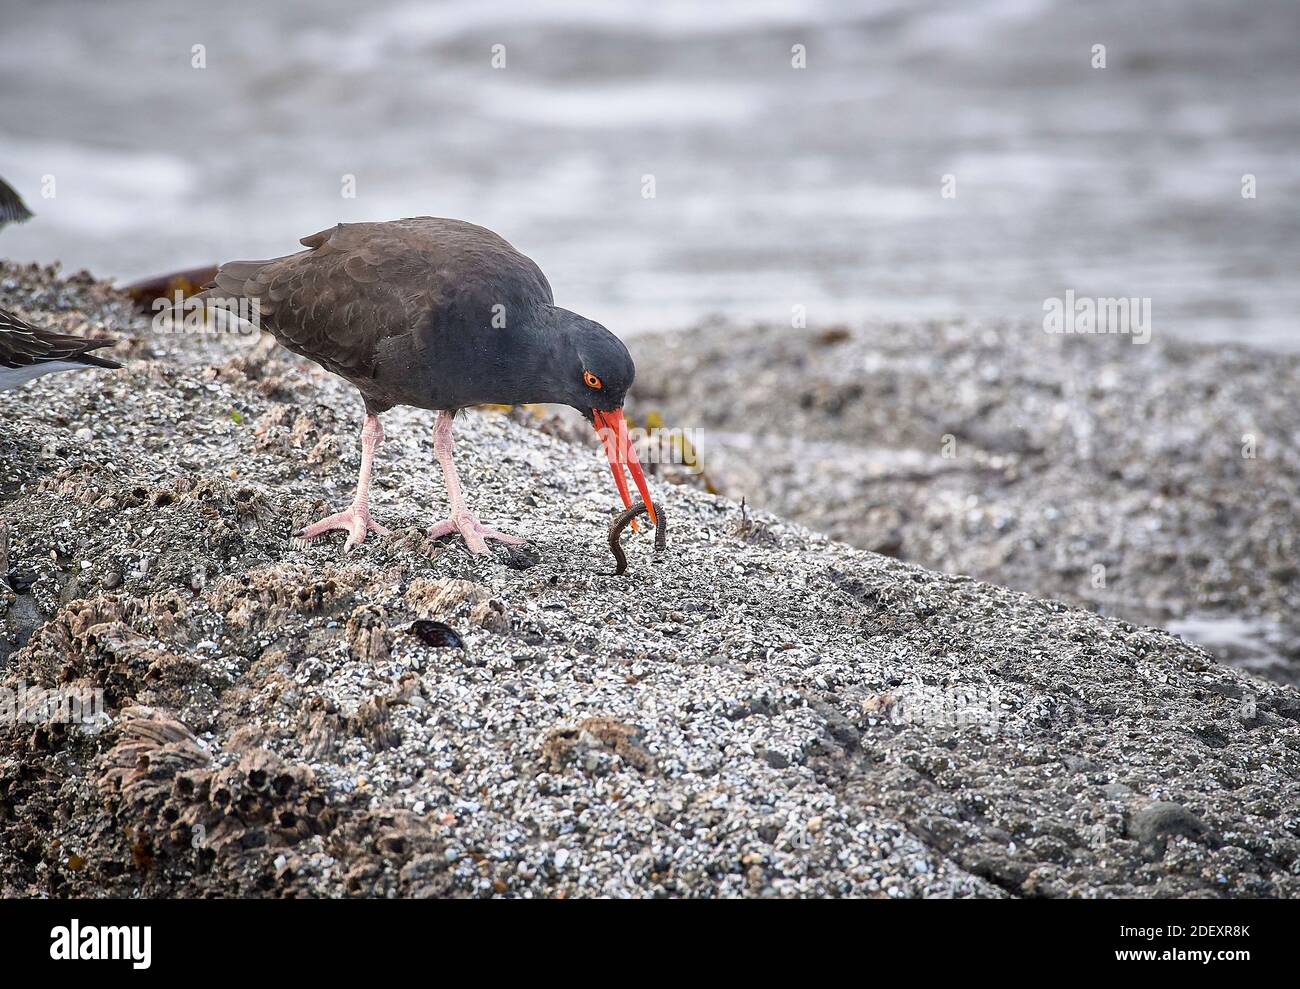 A Black oystercatcher (Haematopus bachmani) feeds at Coquille Point, part of the Oregon Islands National Wildlife Refuge near Bandon, Oregon, USA. Stock Photo